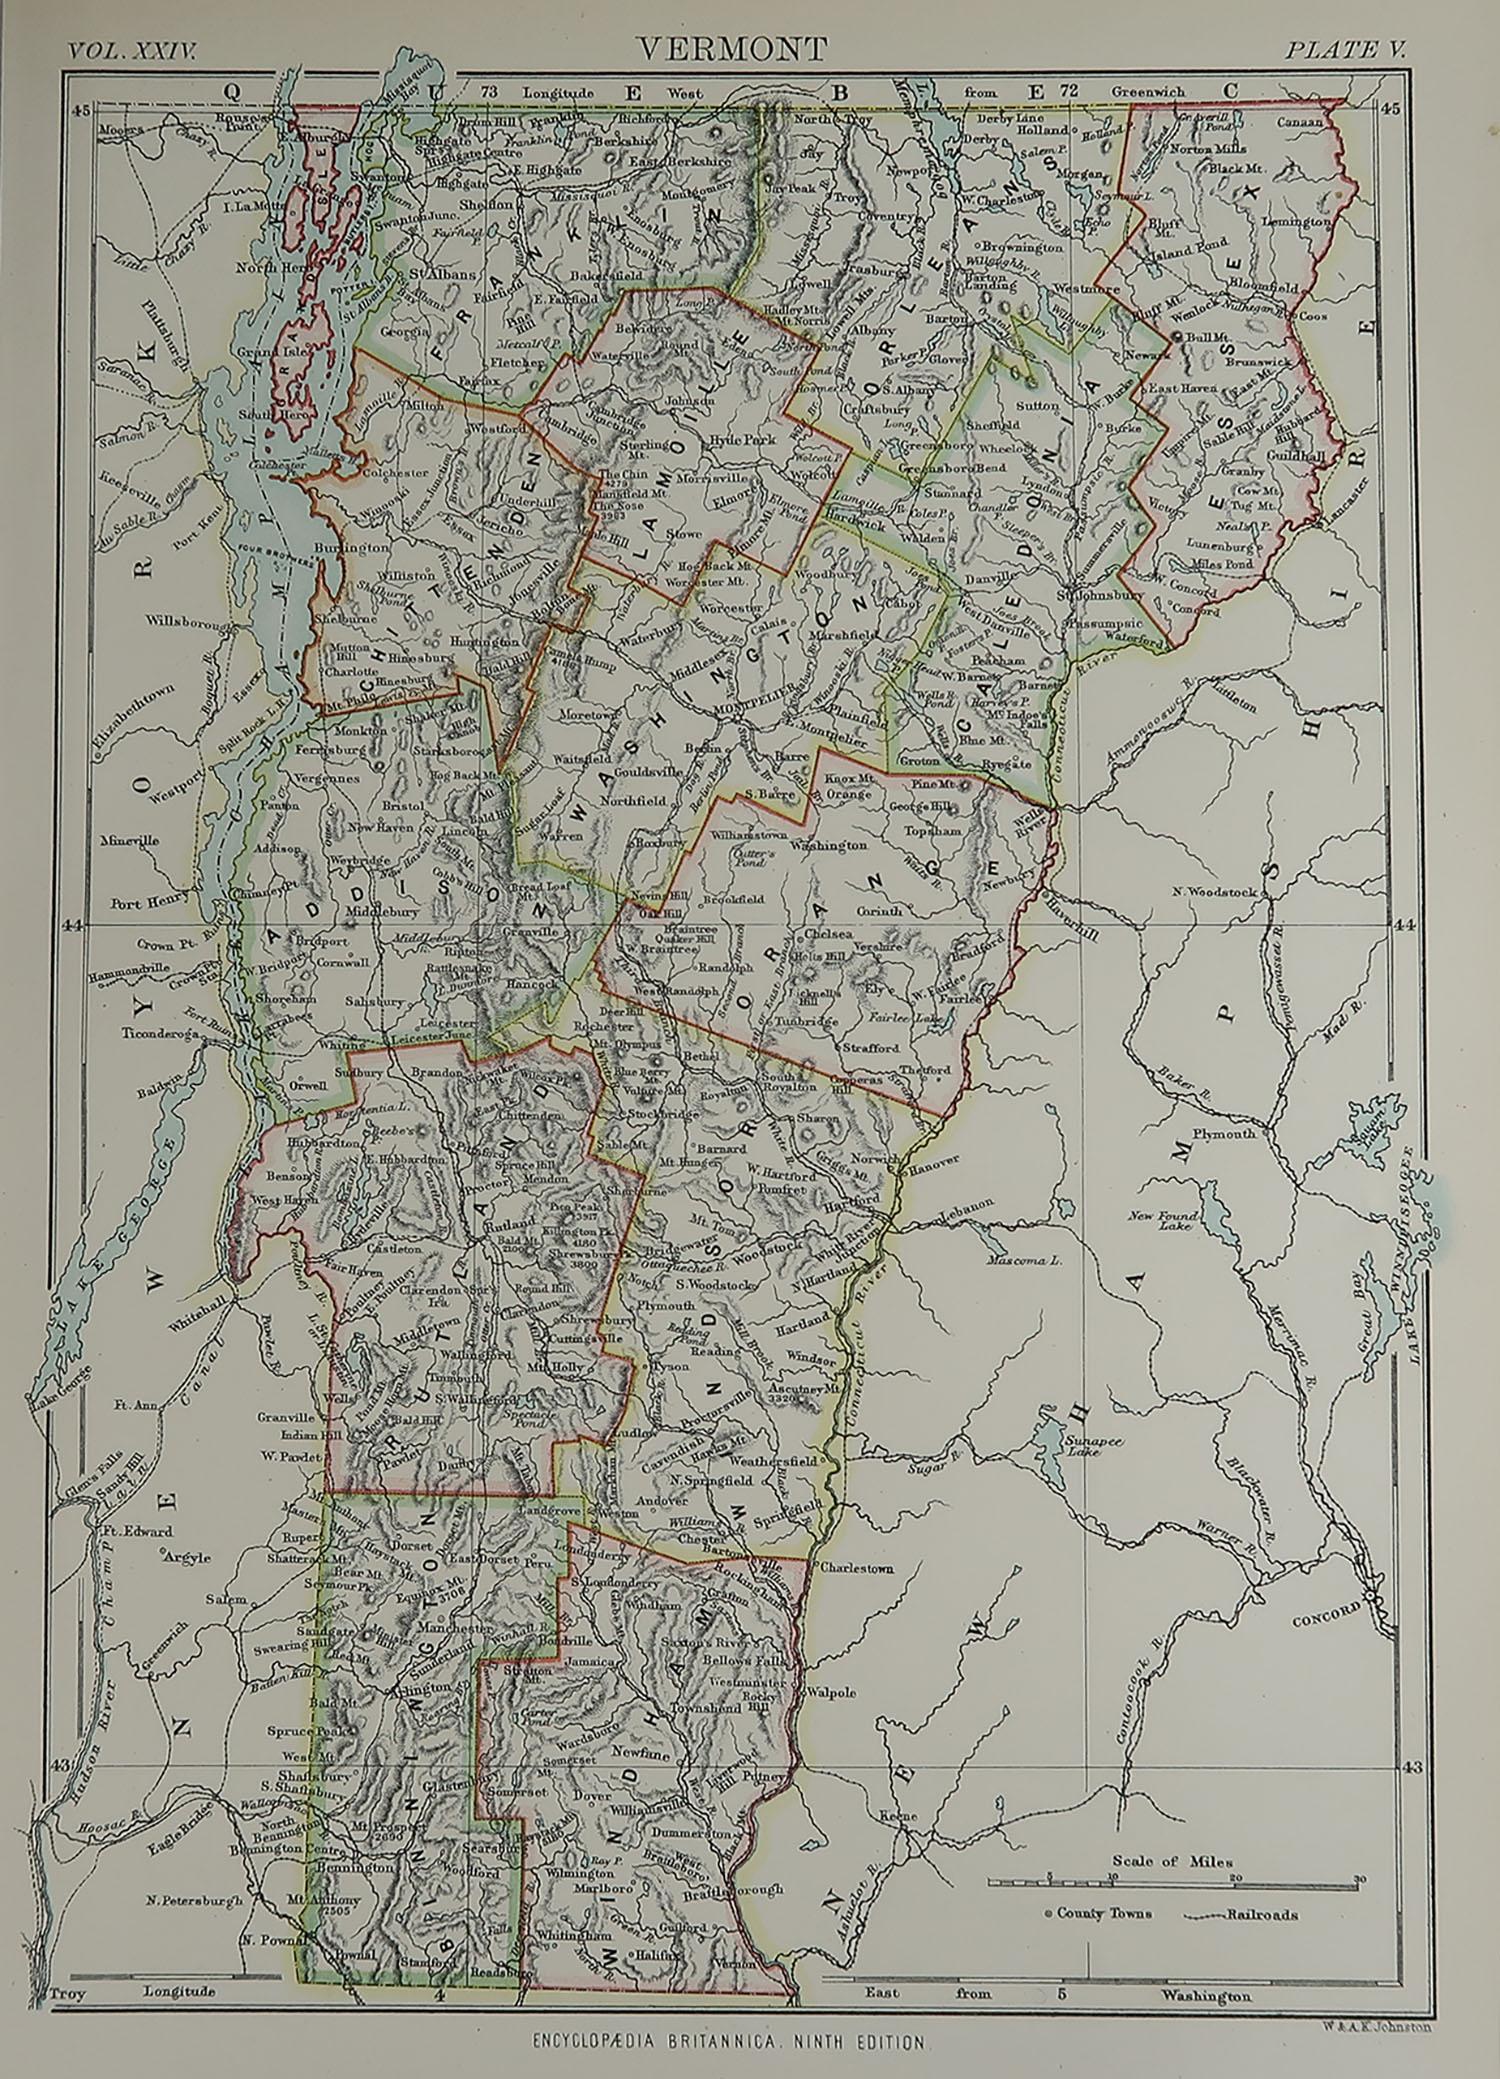 Great map of Vermont

Drawn and Engraved by W. & A.K. Johnston

Published By A & C Black, Edinburgh.

Original colour

Unframed








  